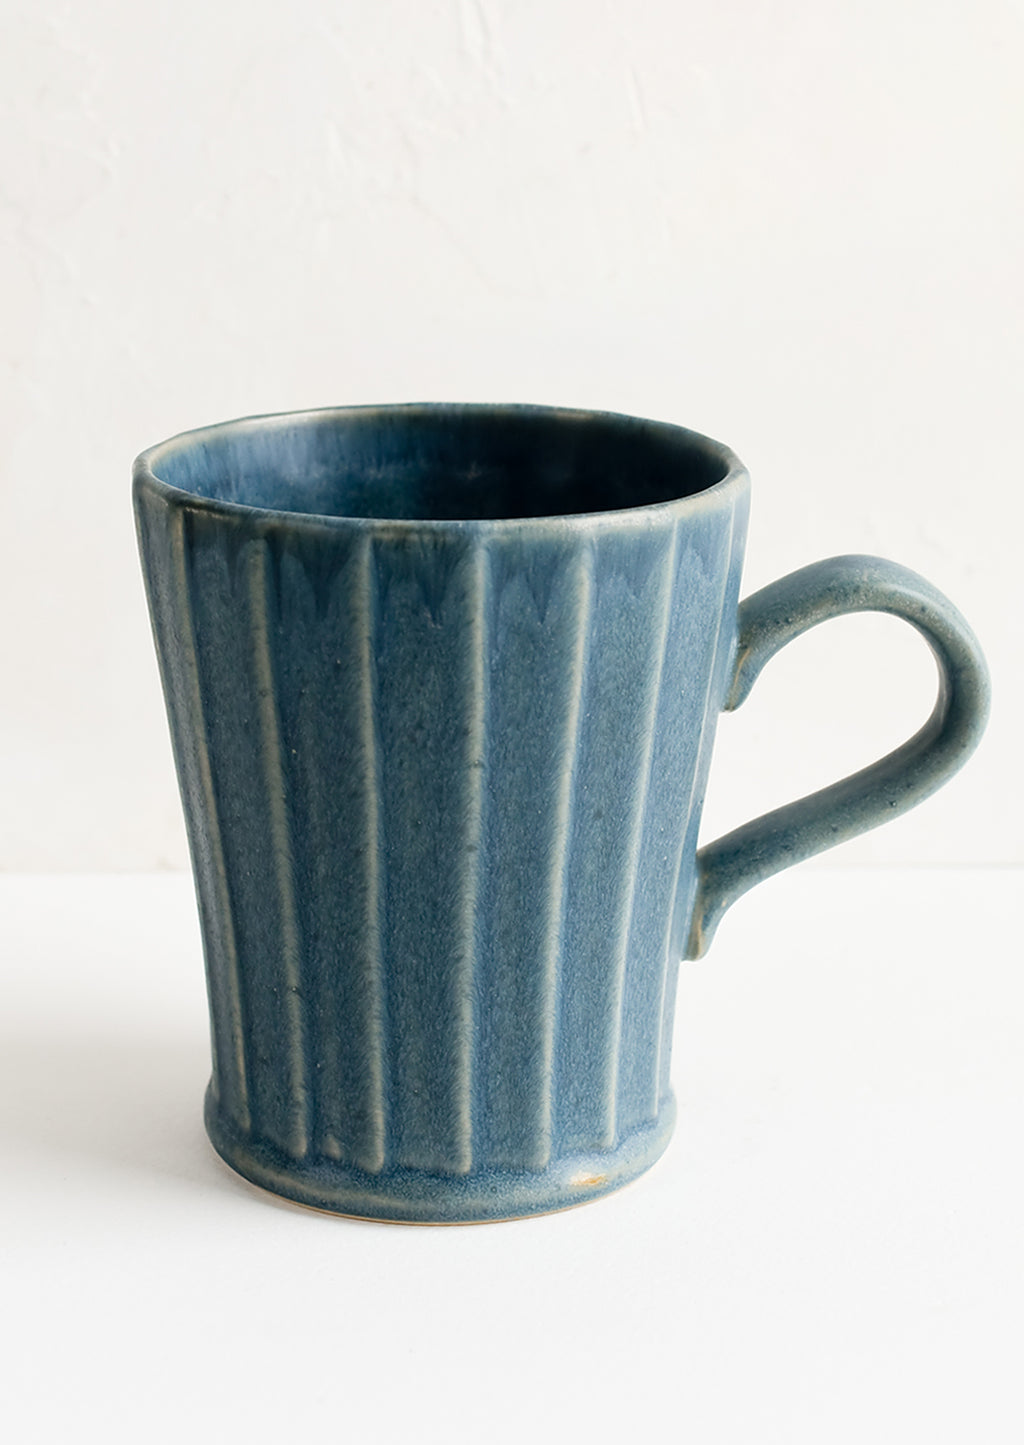 2: A blue ceramic mug with fluted texture and tapered bottom.